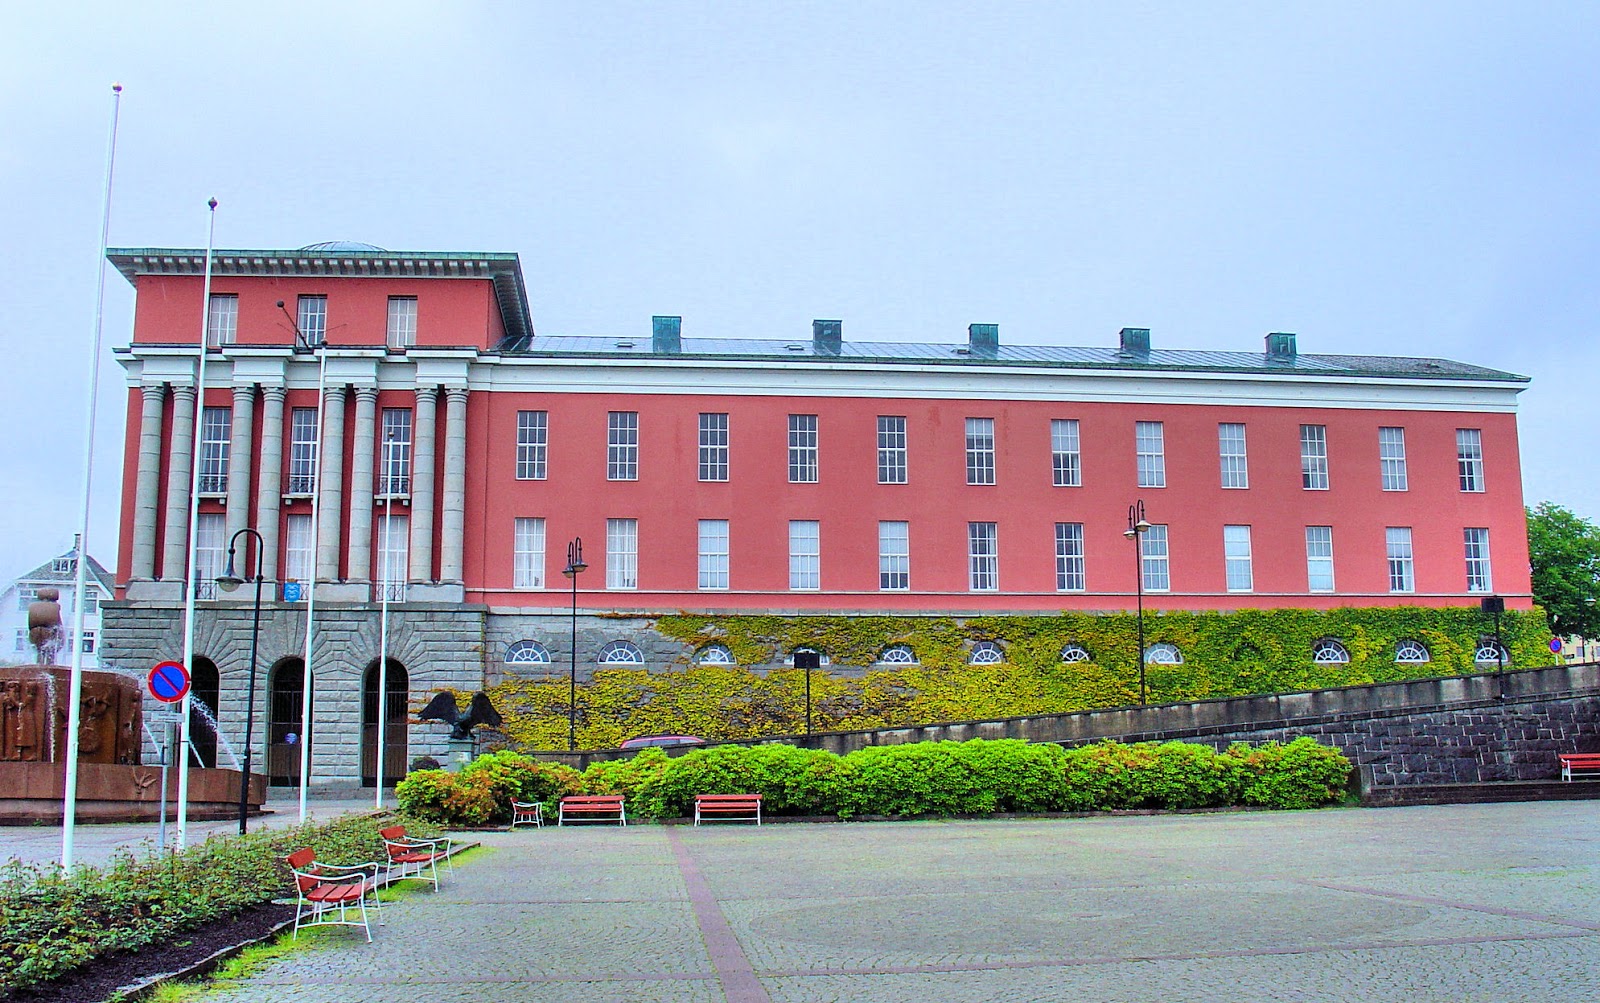 Haugesund City Hall has got to be one of the prettiest townhalls in all of Norway.